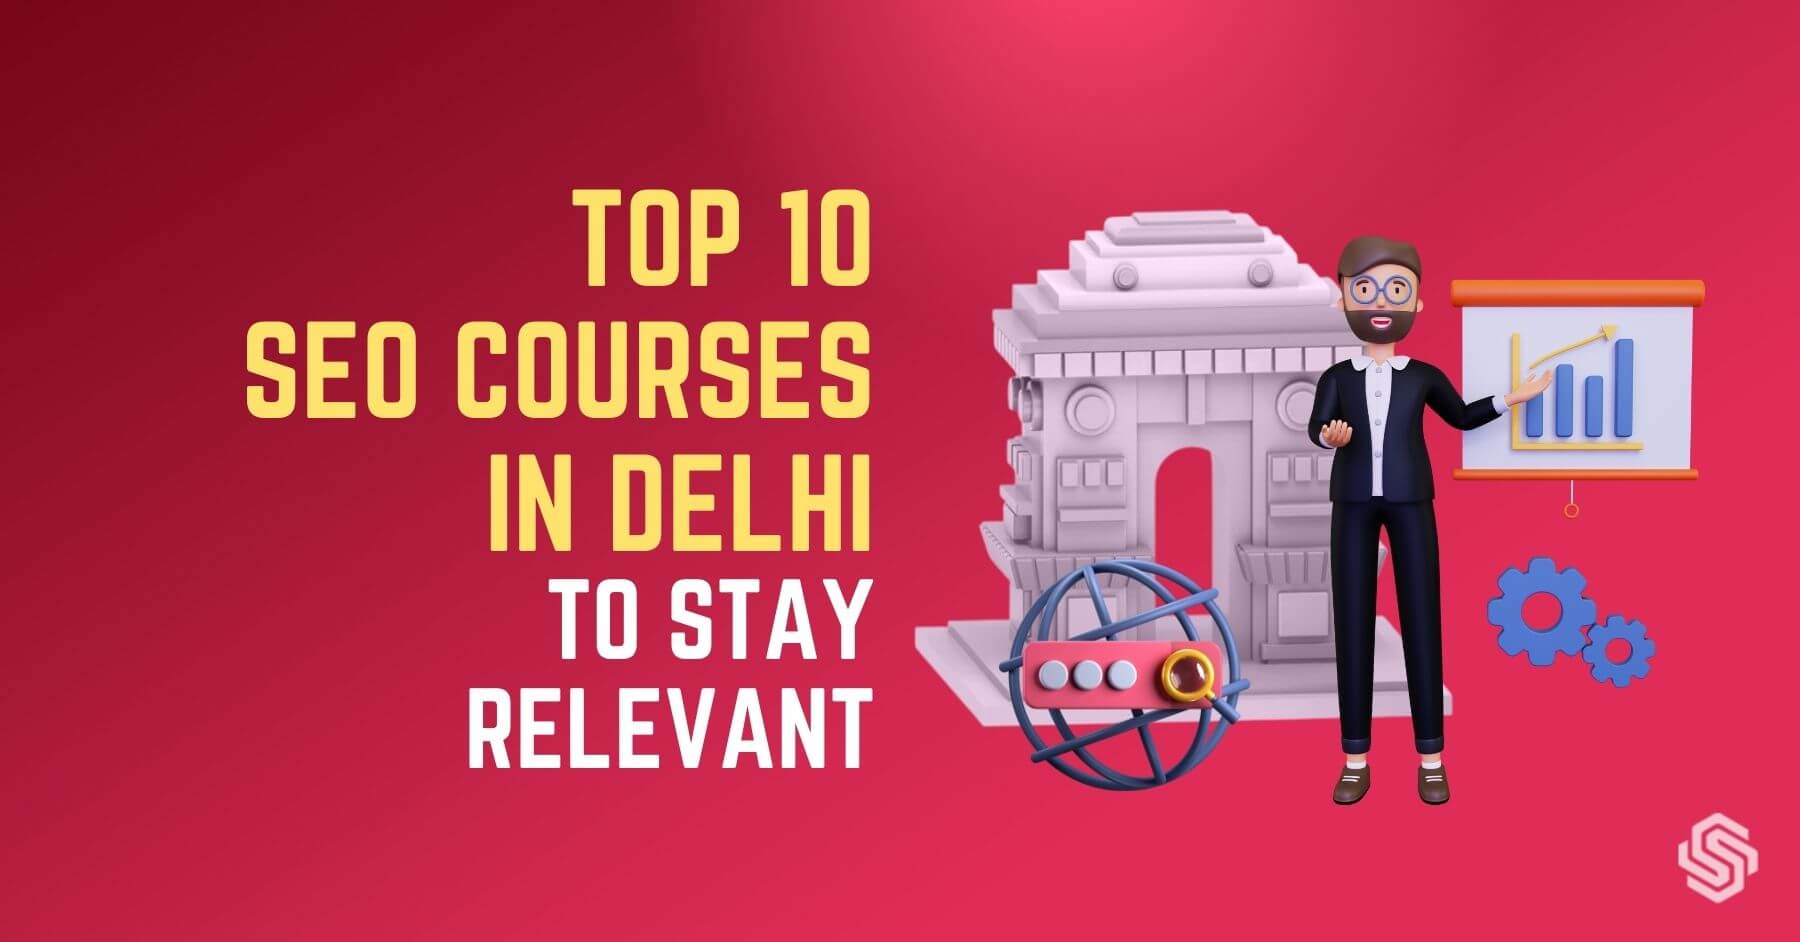 Top 10 SEO Courses in Delhi to stay relevant